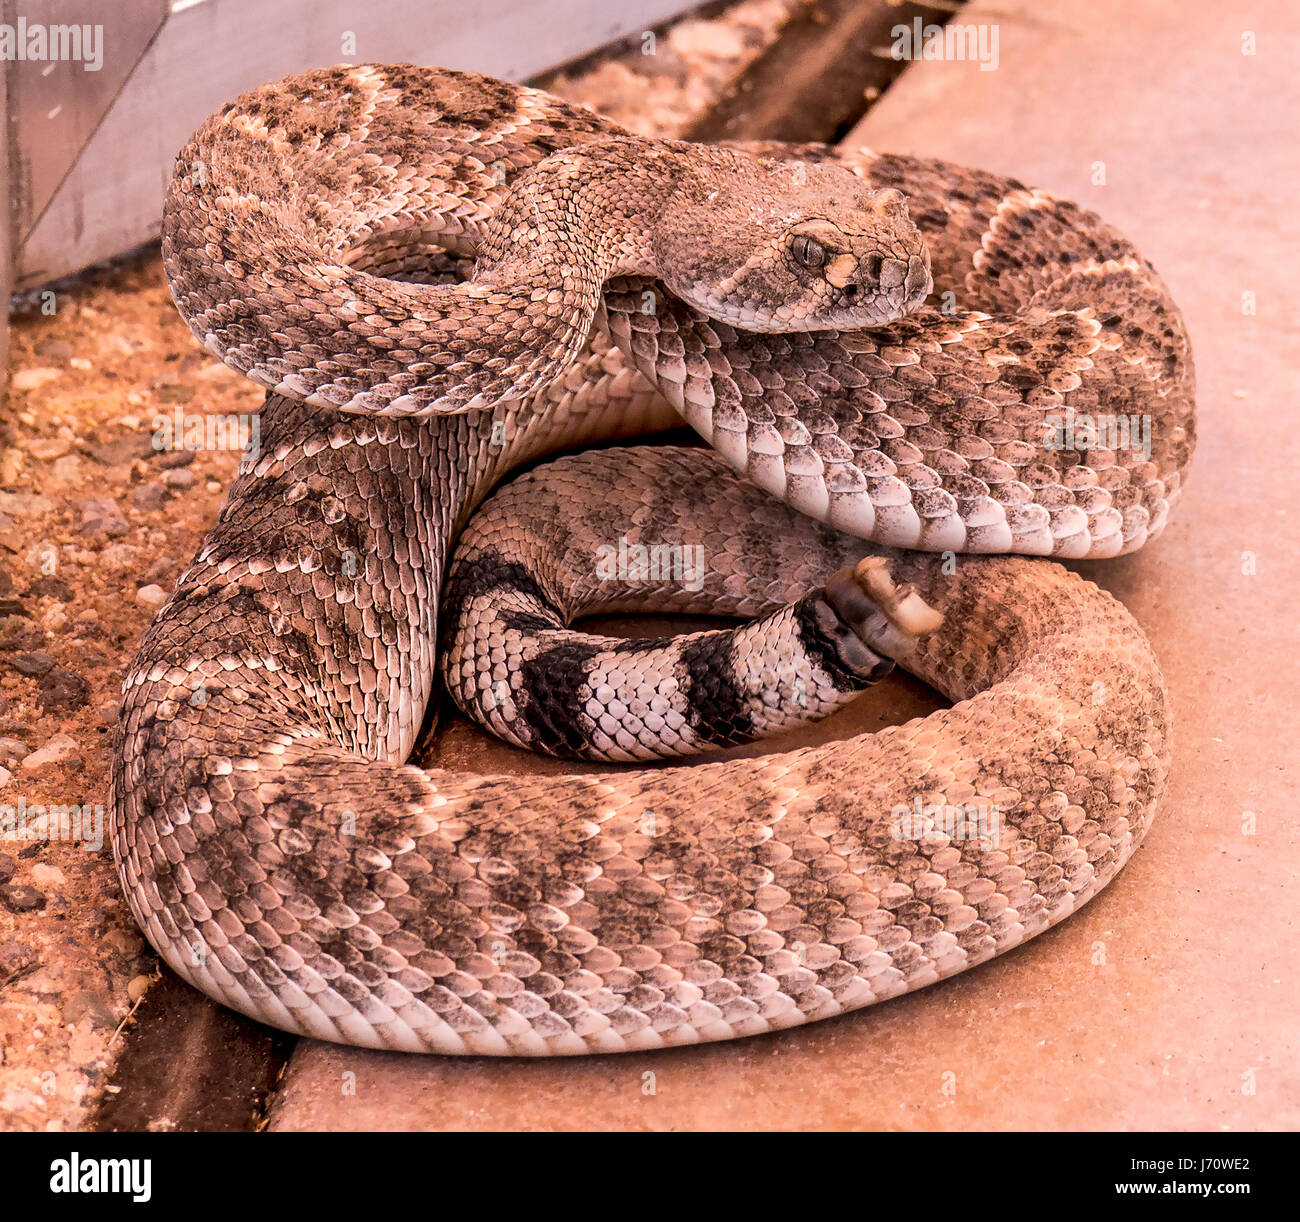 The western diamondback rattlesnake or Texas diamond-back is a venomous rattlesnake species found in the southwestern United States and Mexico. It is  Stock Photo